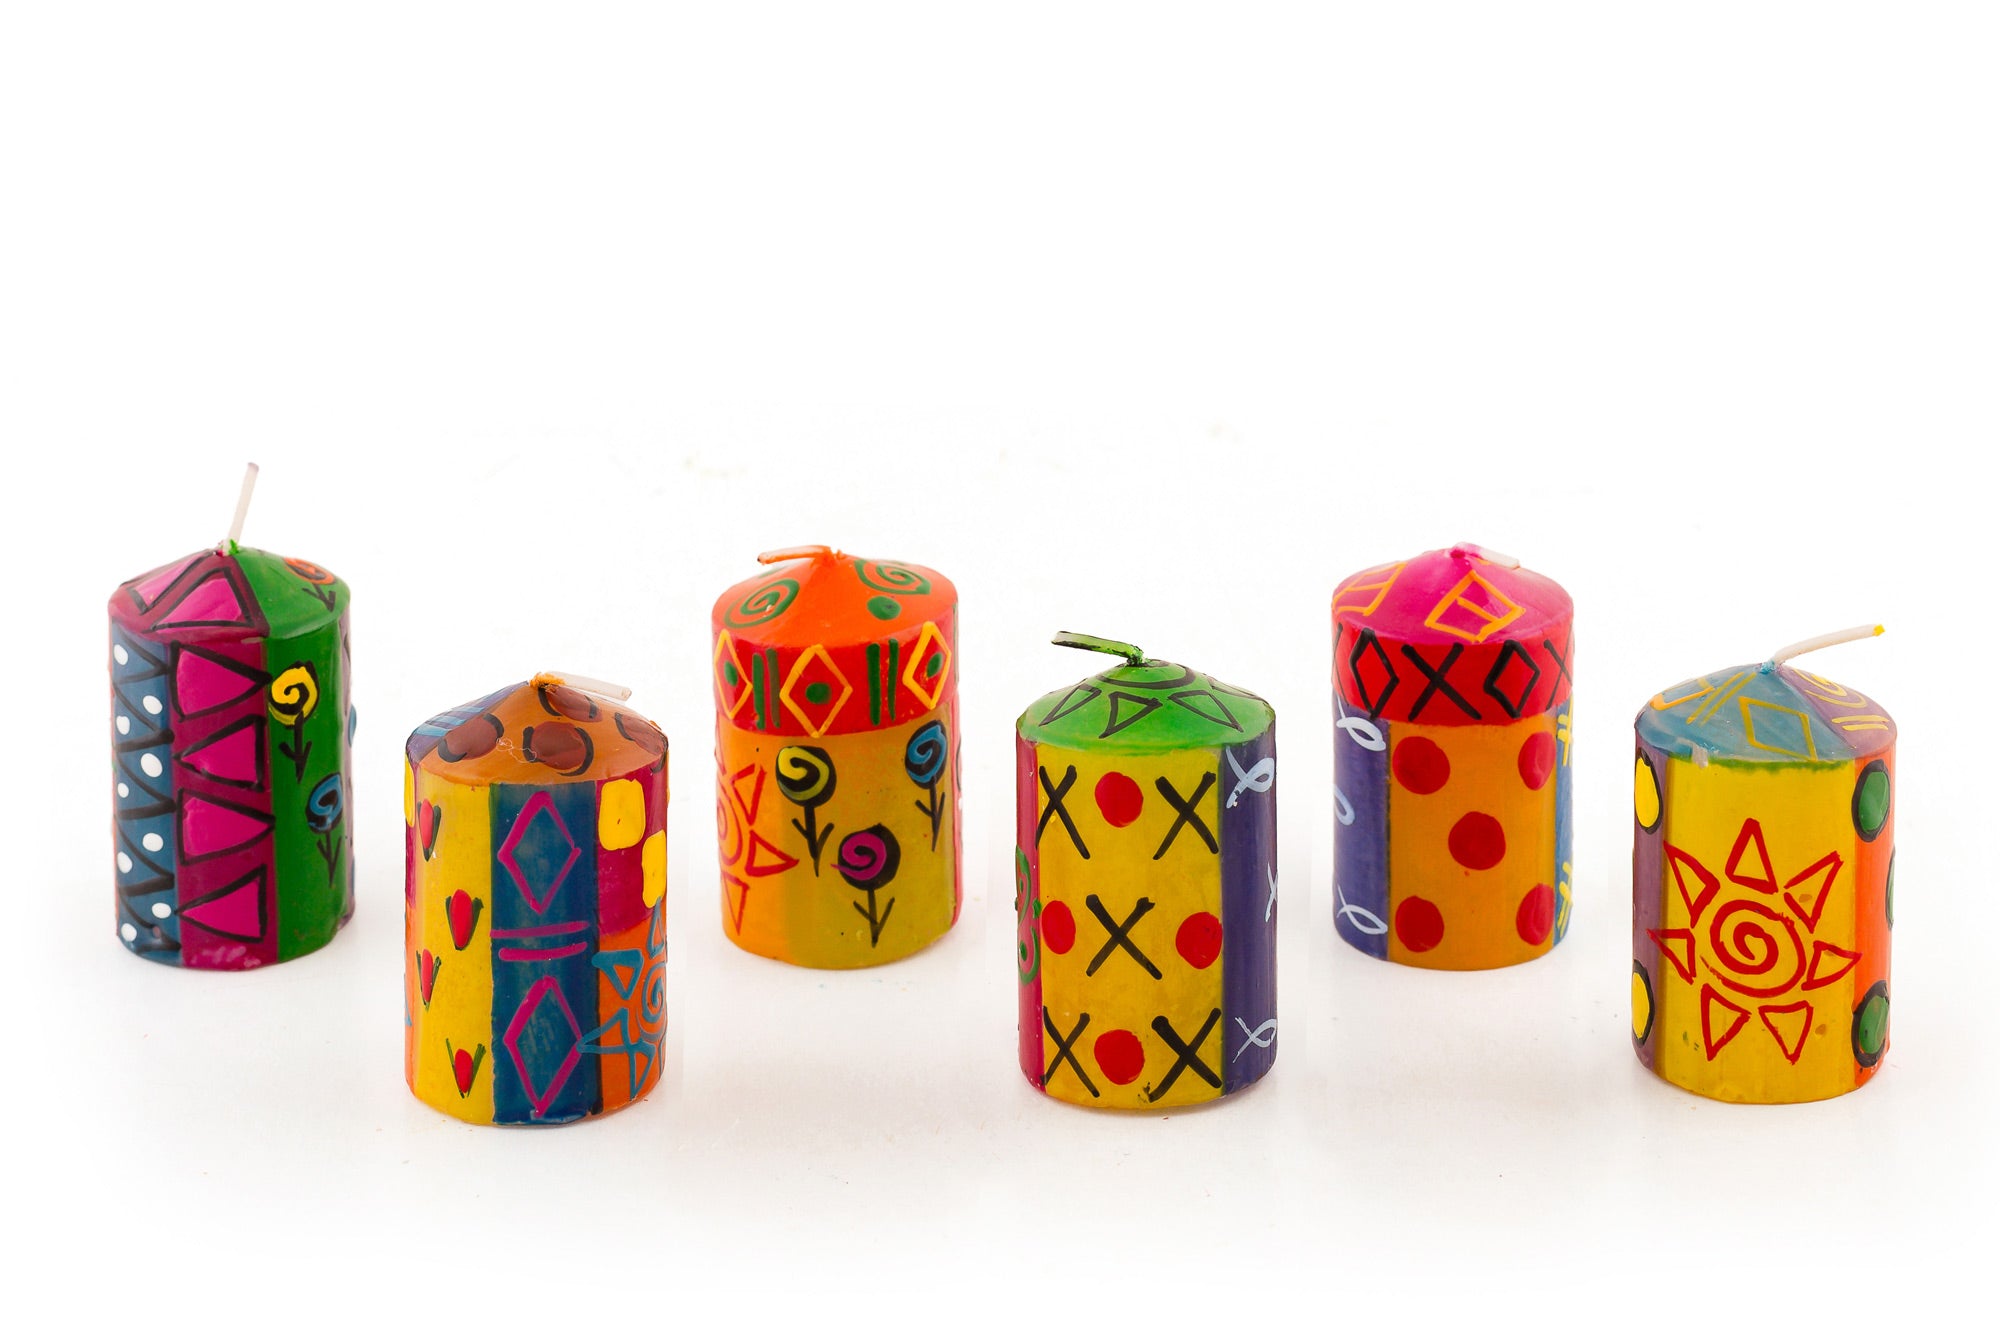 Six votives in various designs of Multicolor Ethnic. Bright, colorful, sunshine and fun designs that sing out Africa! The votives come in a 6 pack.